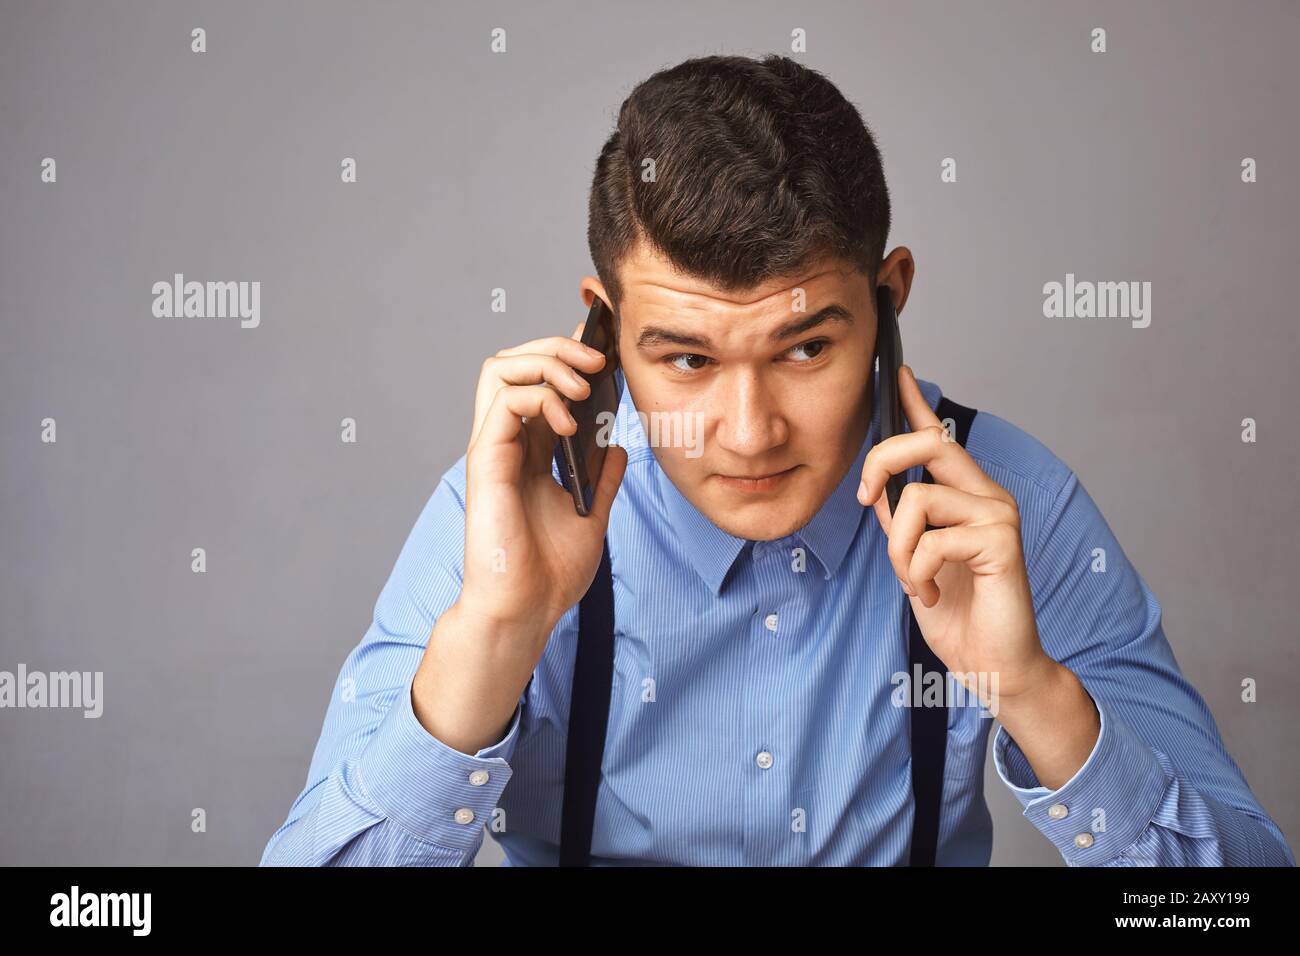 man with two phones near his ears. He actively decides something Stock Photo